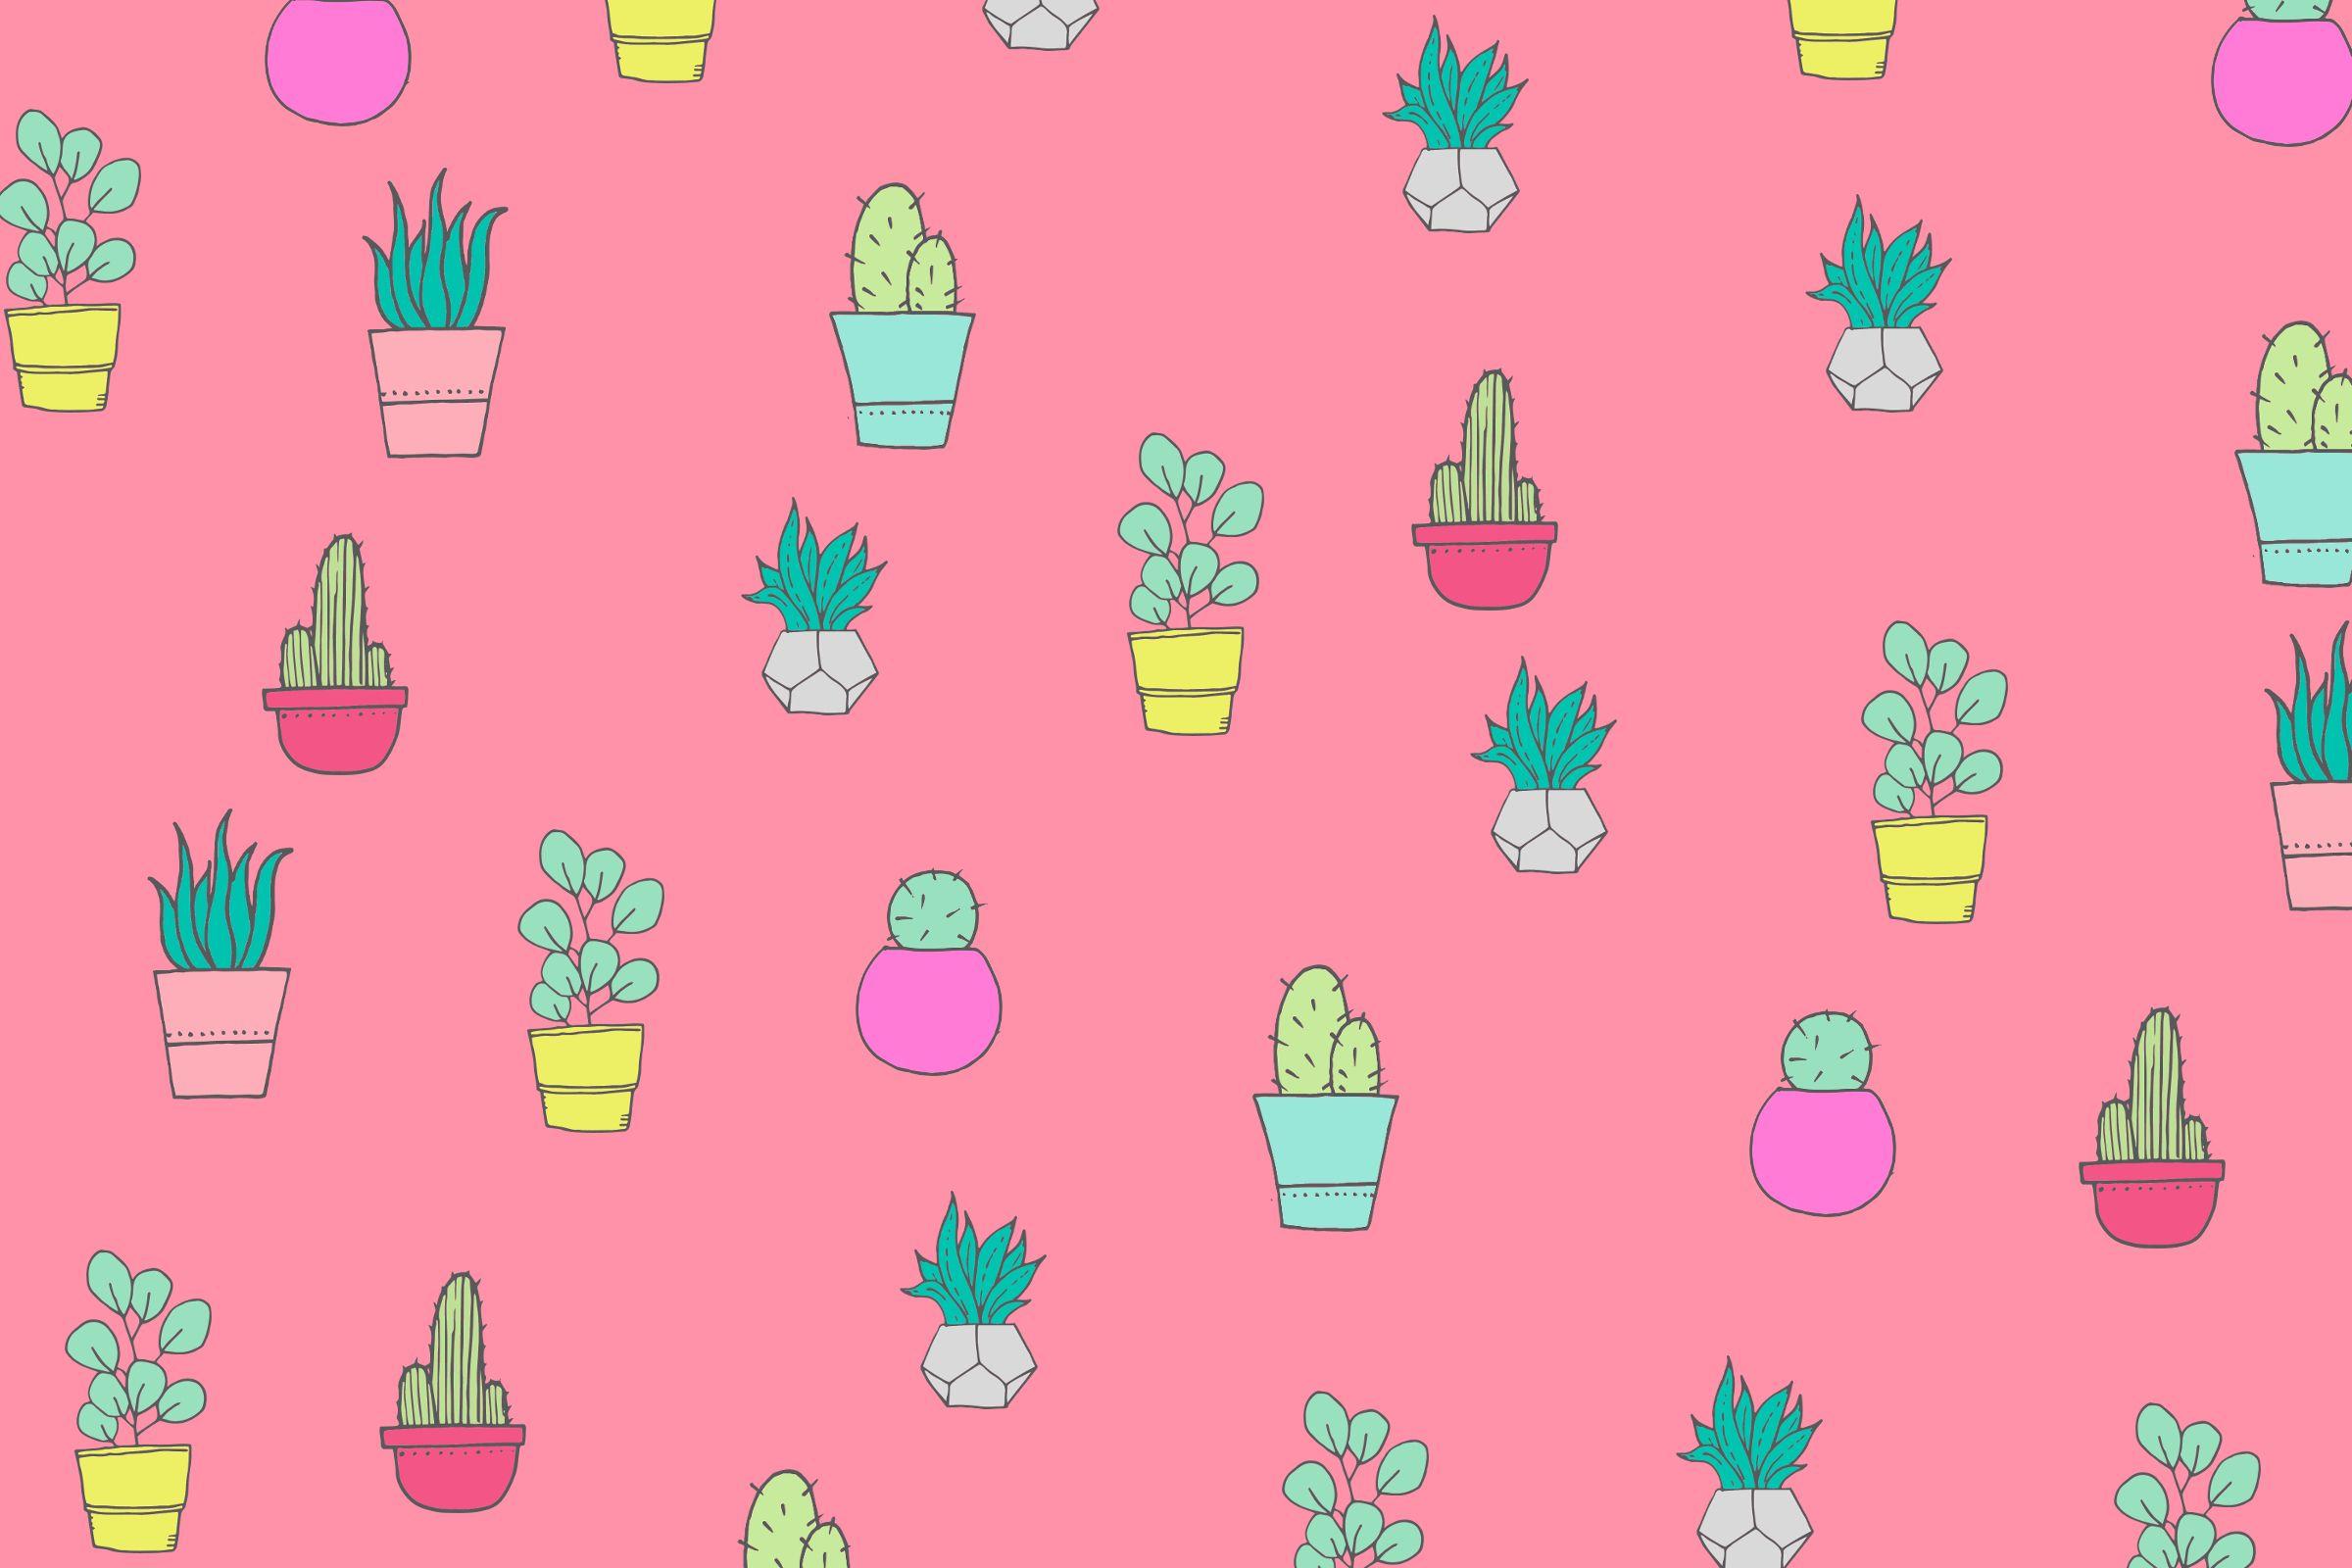 FREE CACTUS AND SUCCULENT WALLPAPERS FOR YOUR DESKTOP, TABLET AND